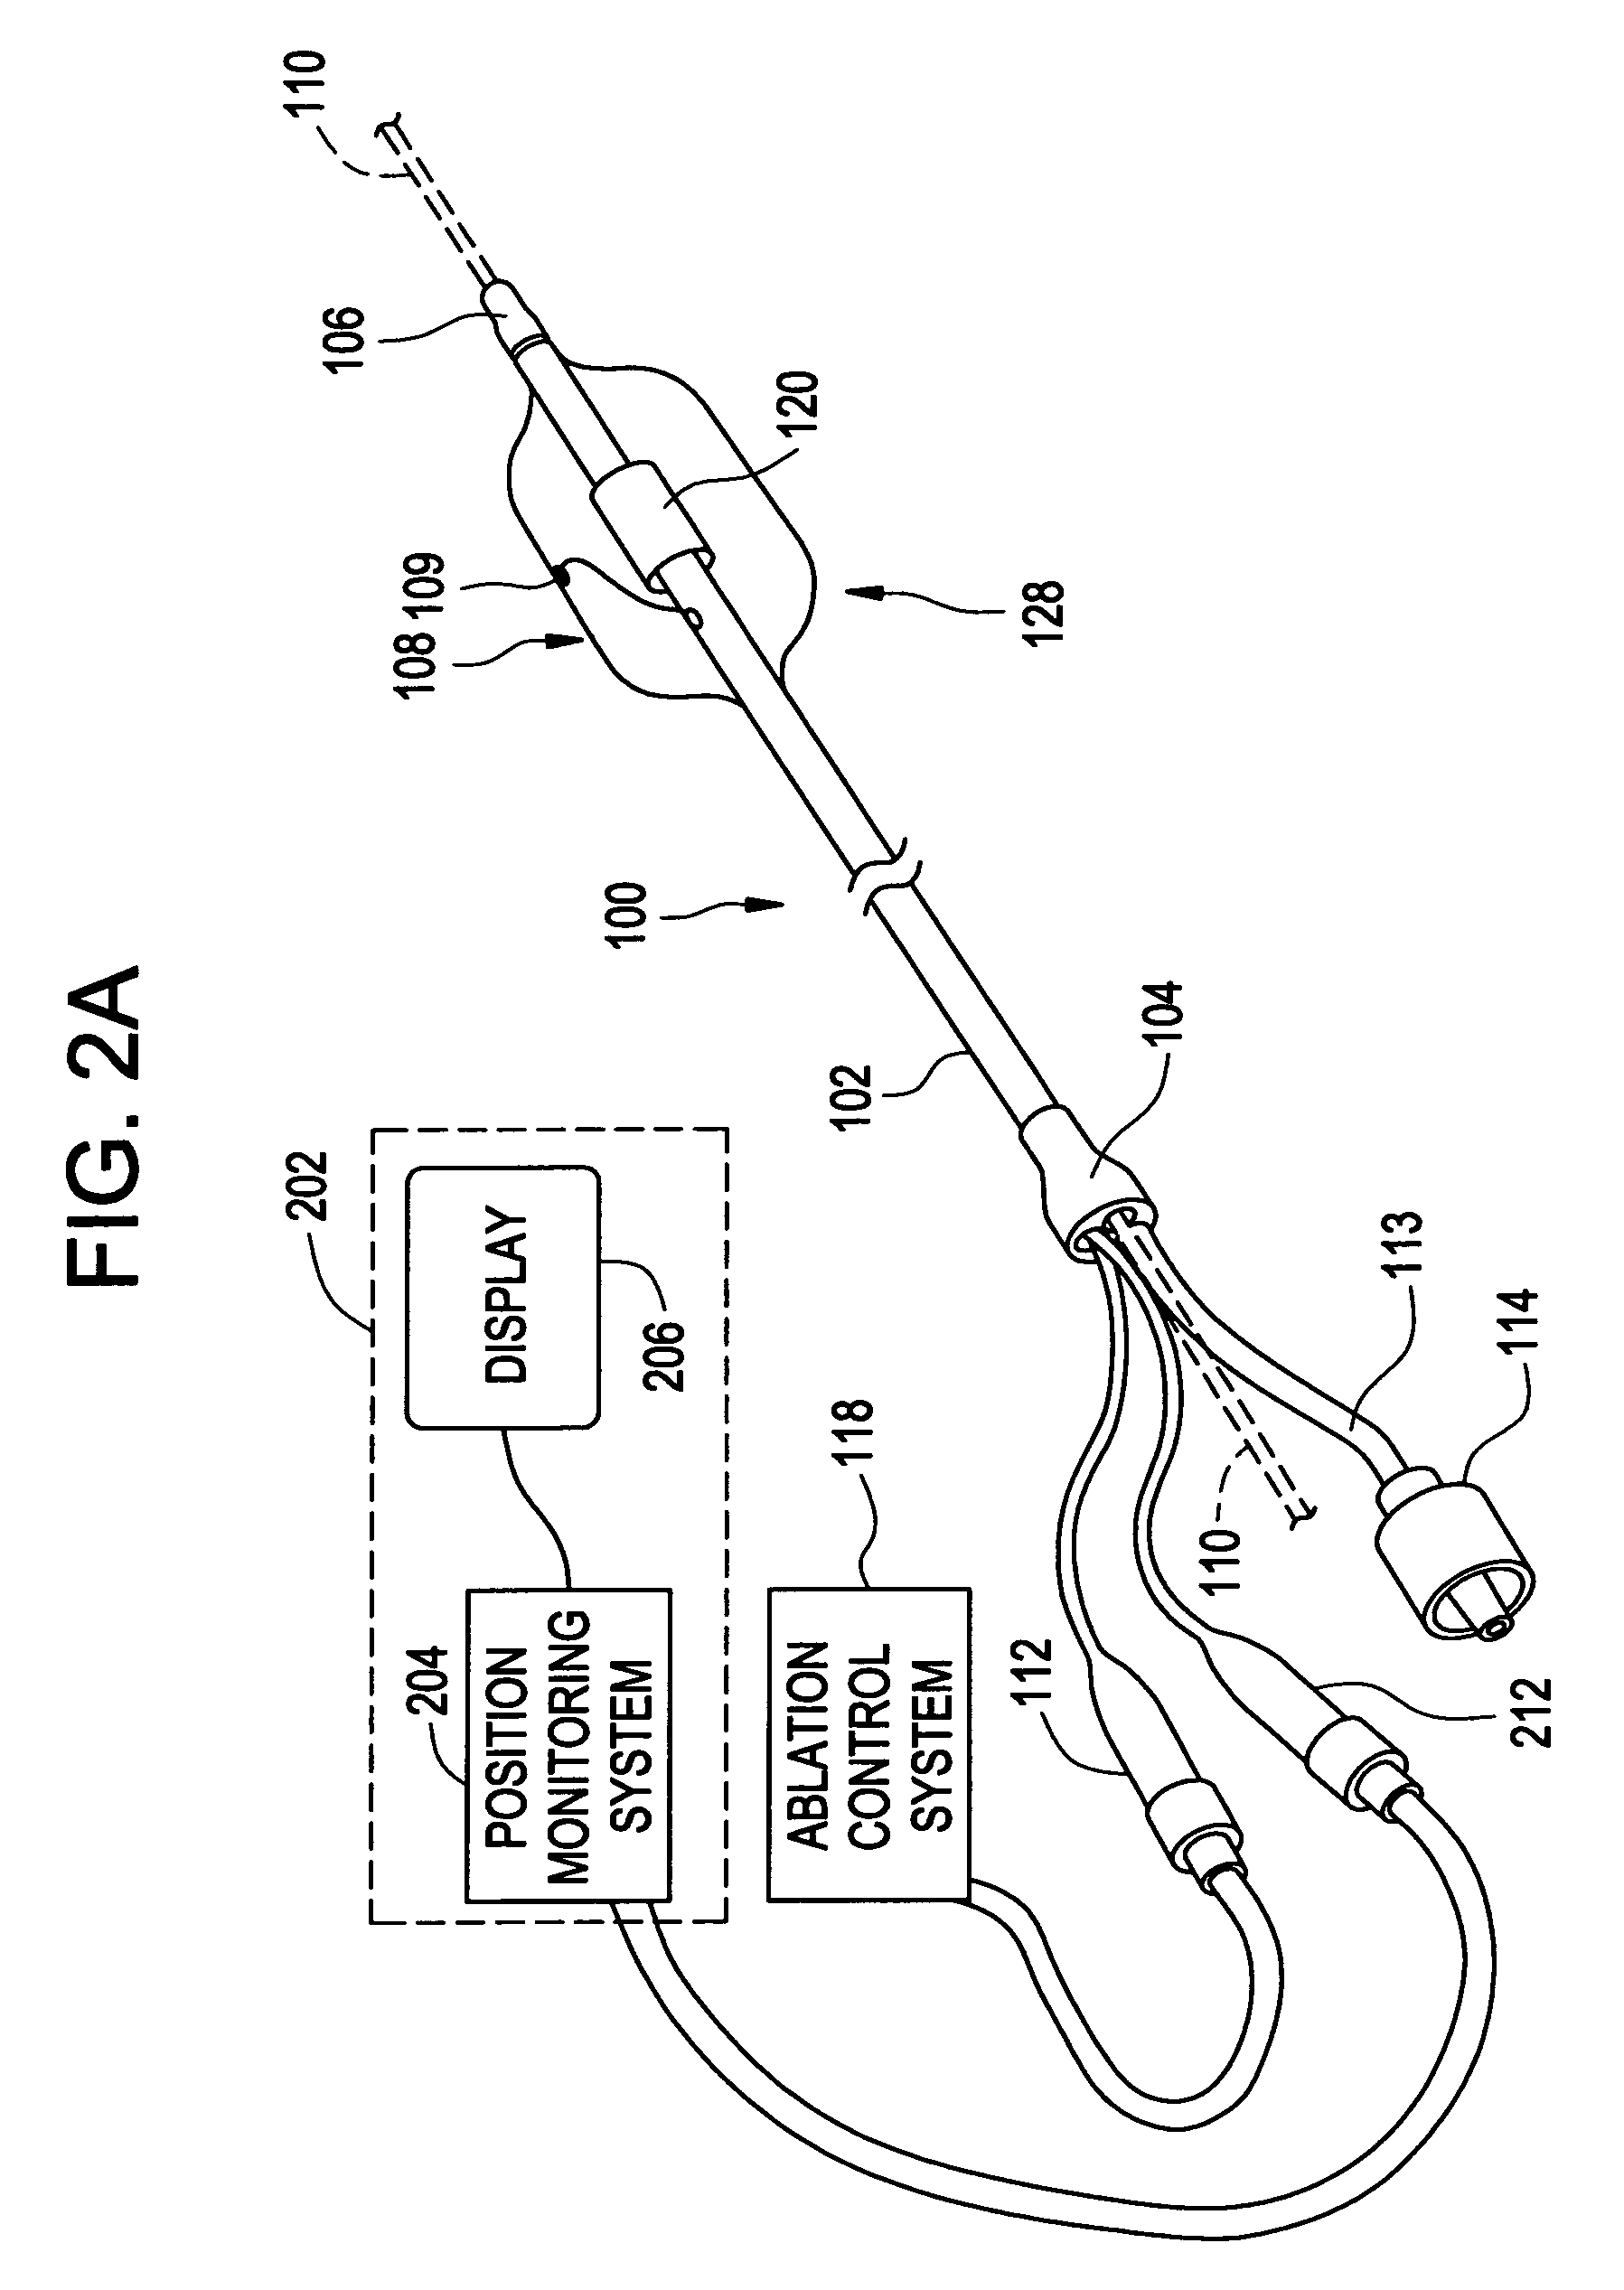 Ablation device with spiral array ultrasound transducer